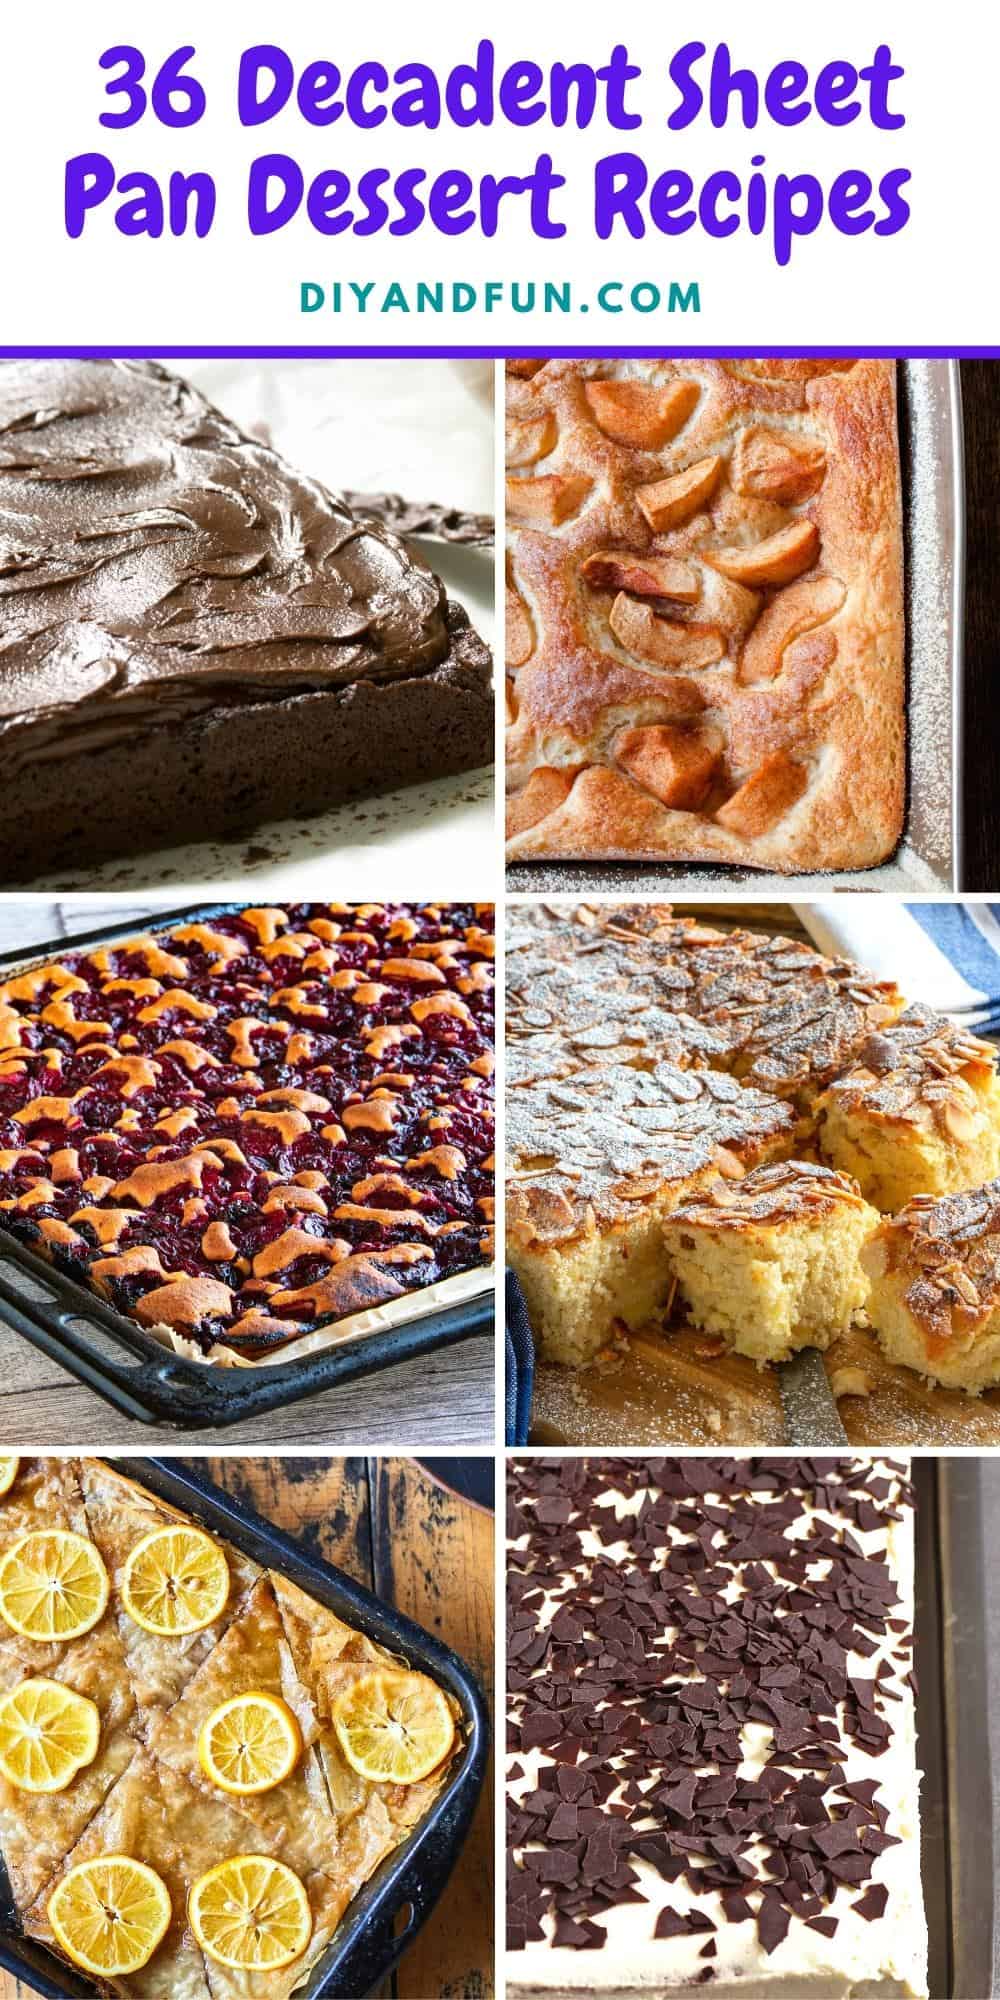 36 Decadent Sheet Pan Dessert Recipes to Feed A Crowd. Include healthier fruit desserts, sugar free desserts, and more!